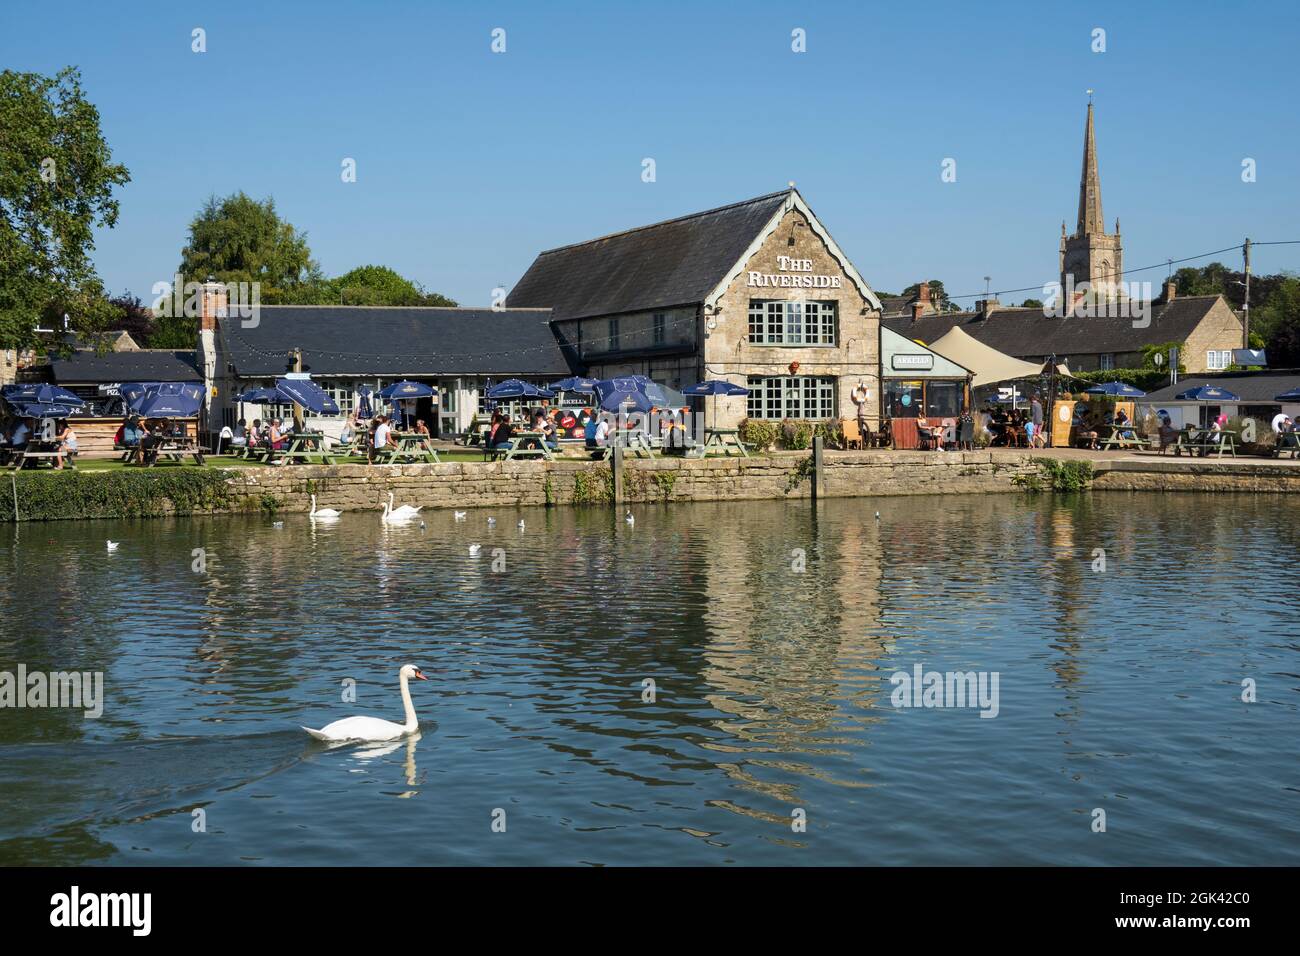 The Riverside Pub an der Themse, Lechlade-on-Thames, Cotswolds, Gloucestershire, England, Vereinigtes Königreich, Europa Stockfoto